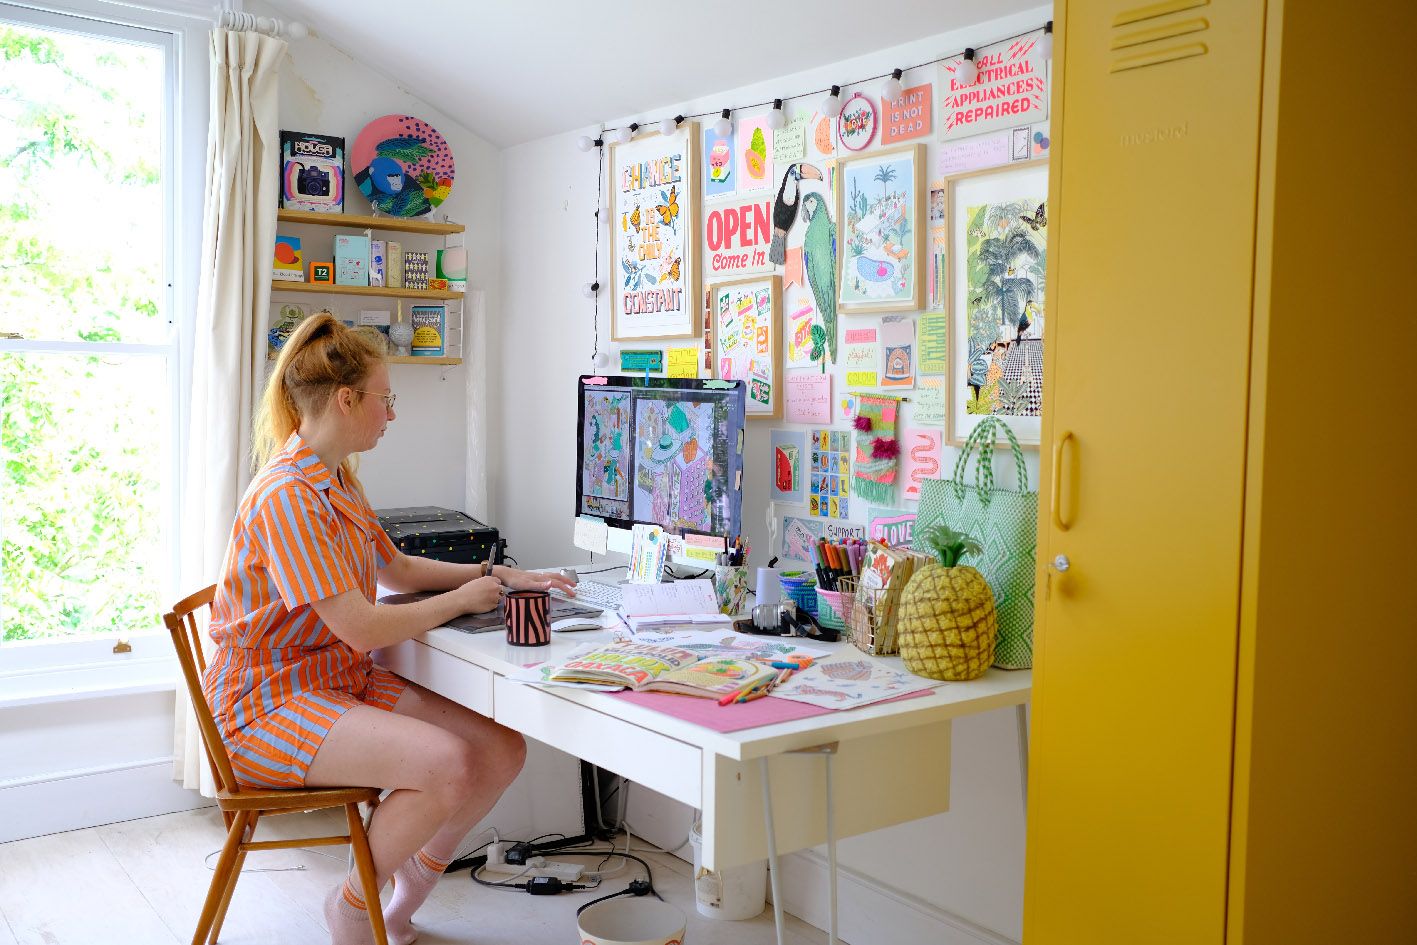 Jacqueline Colley illustrating colorful wallpaper designs in her home studio